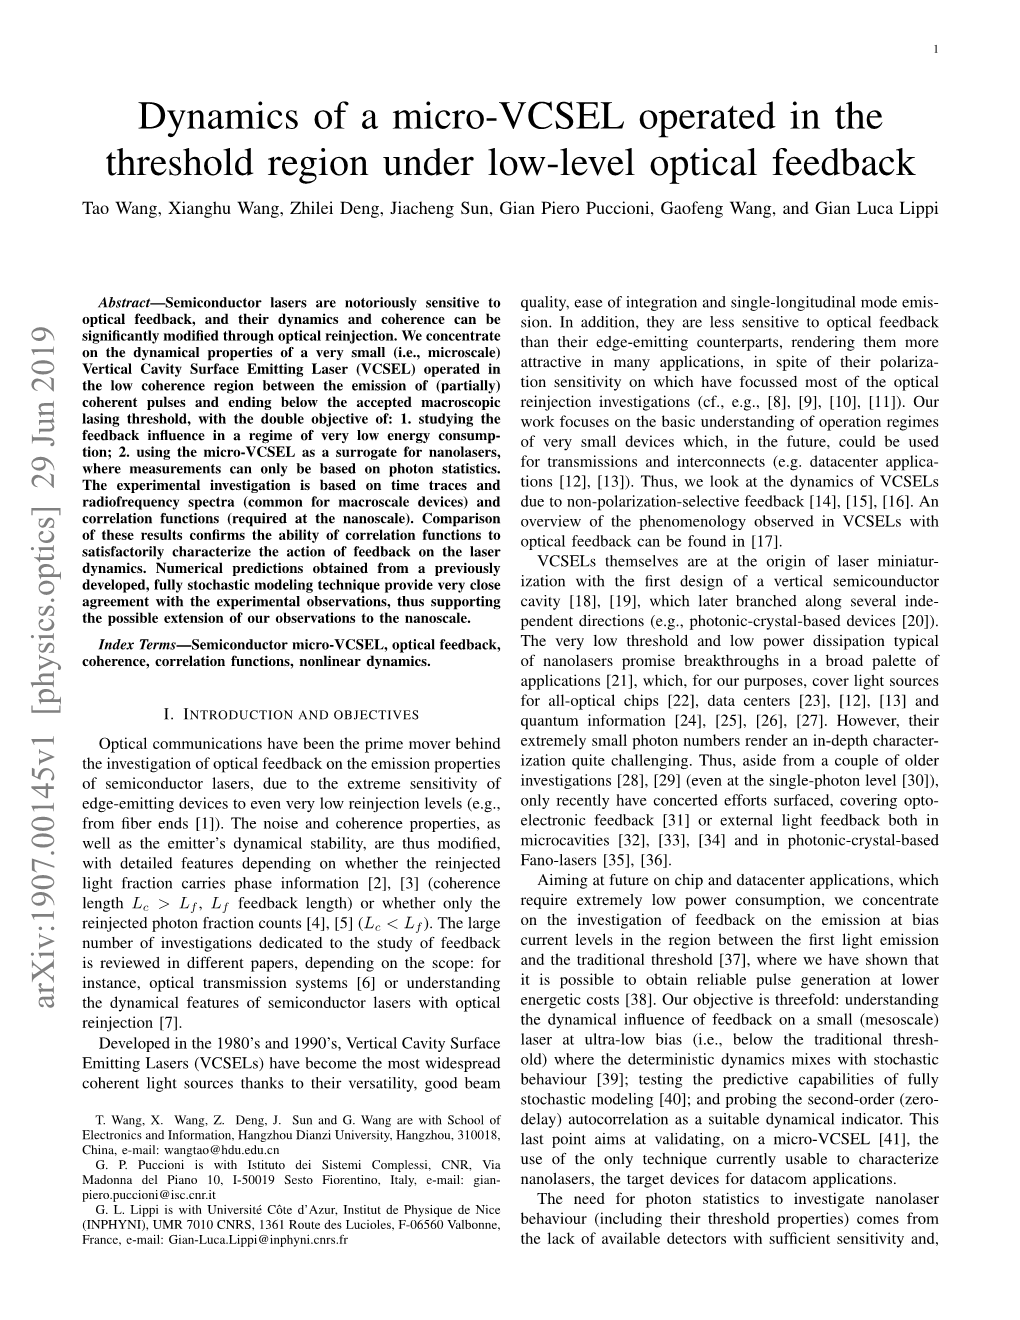 Dynamics of a Micro-VCSEL Operated in the Threshold Region Under Low-Level Optical Feedback